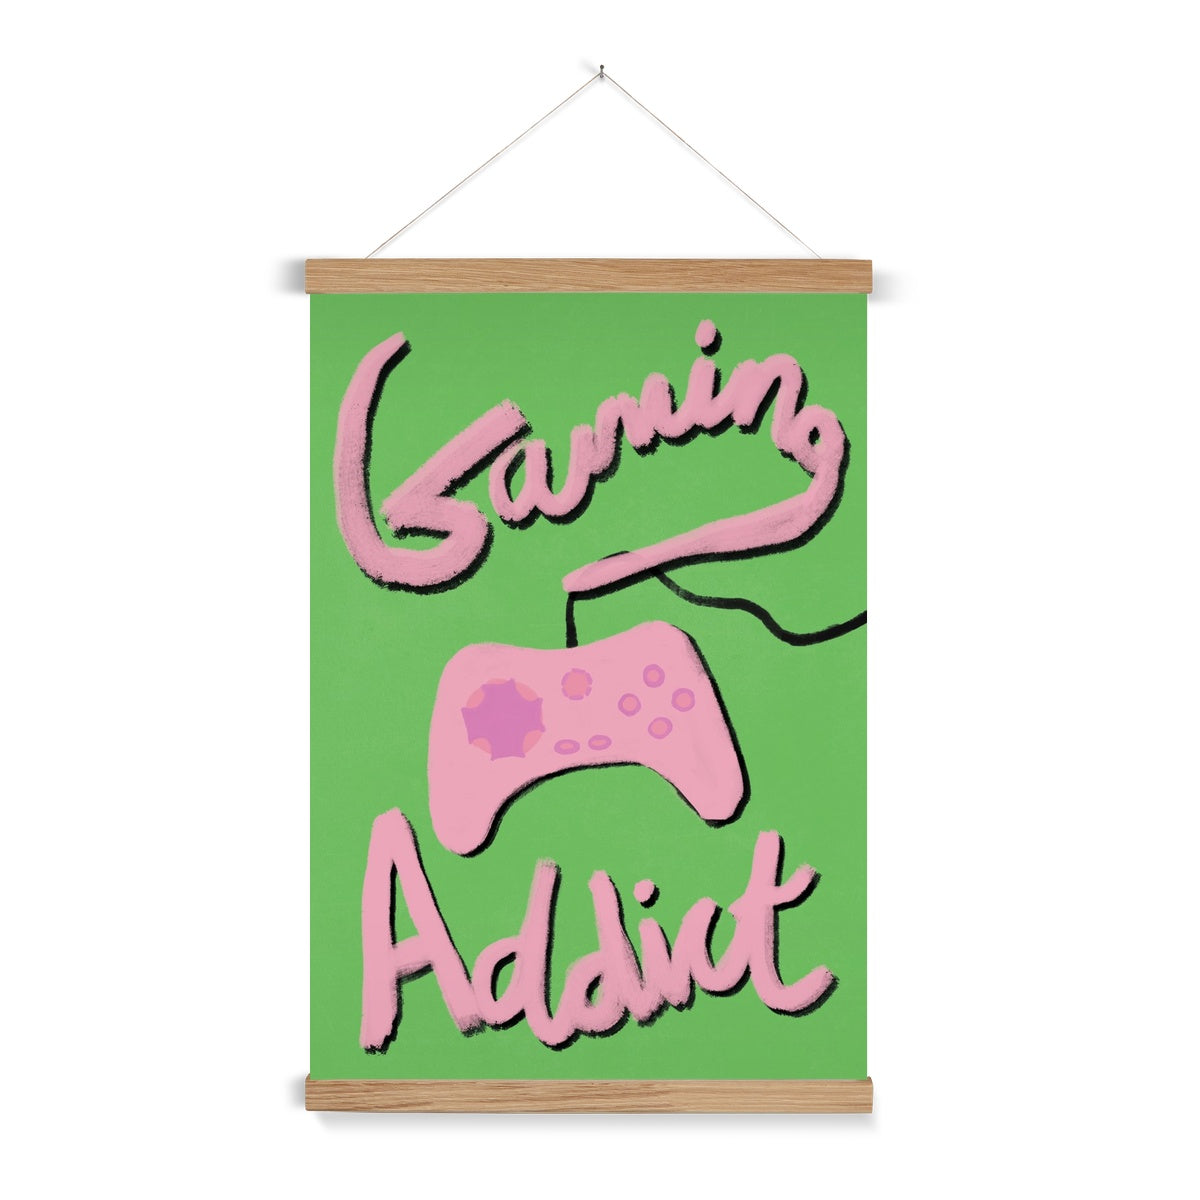 Gaming Addict Print - Green, Pink Fine Art Print with Hanger